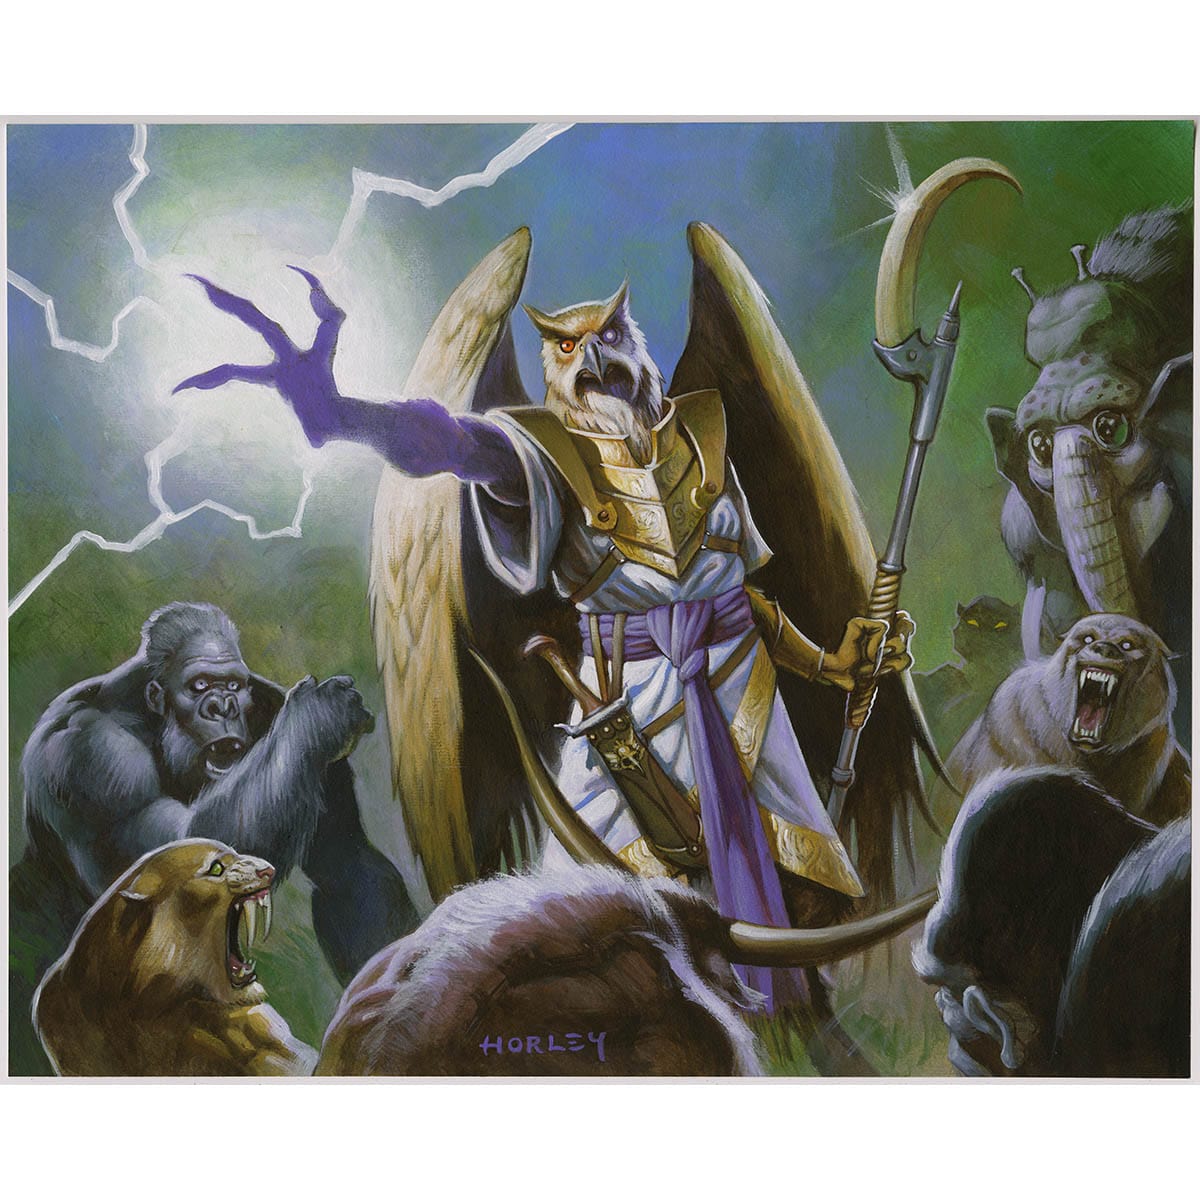 Unquestioned Authority Print - Print - Original Magic Art - Accessories for Magic the Gathering and other card games